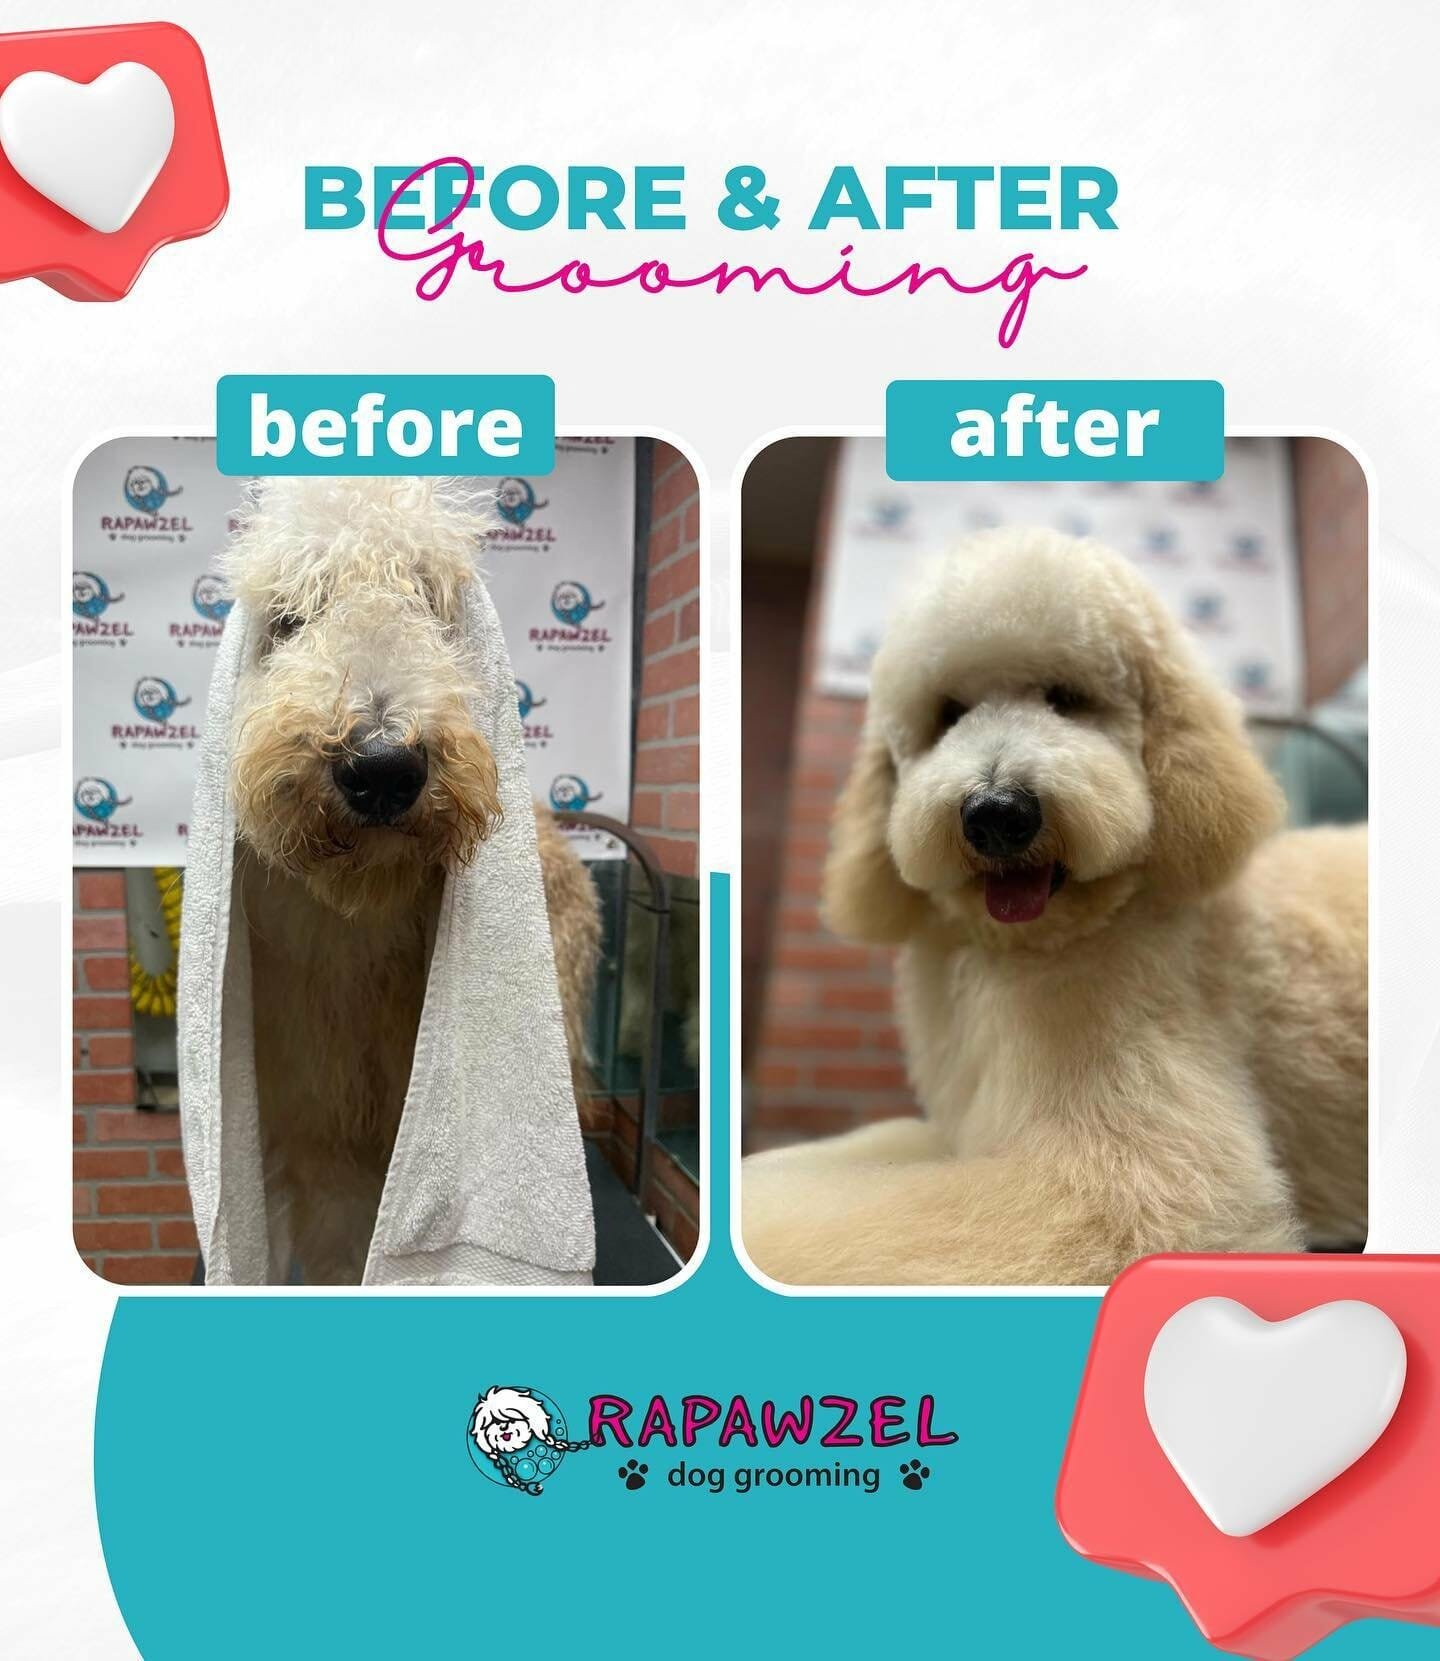 Pamper your pets with Rapawzel!